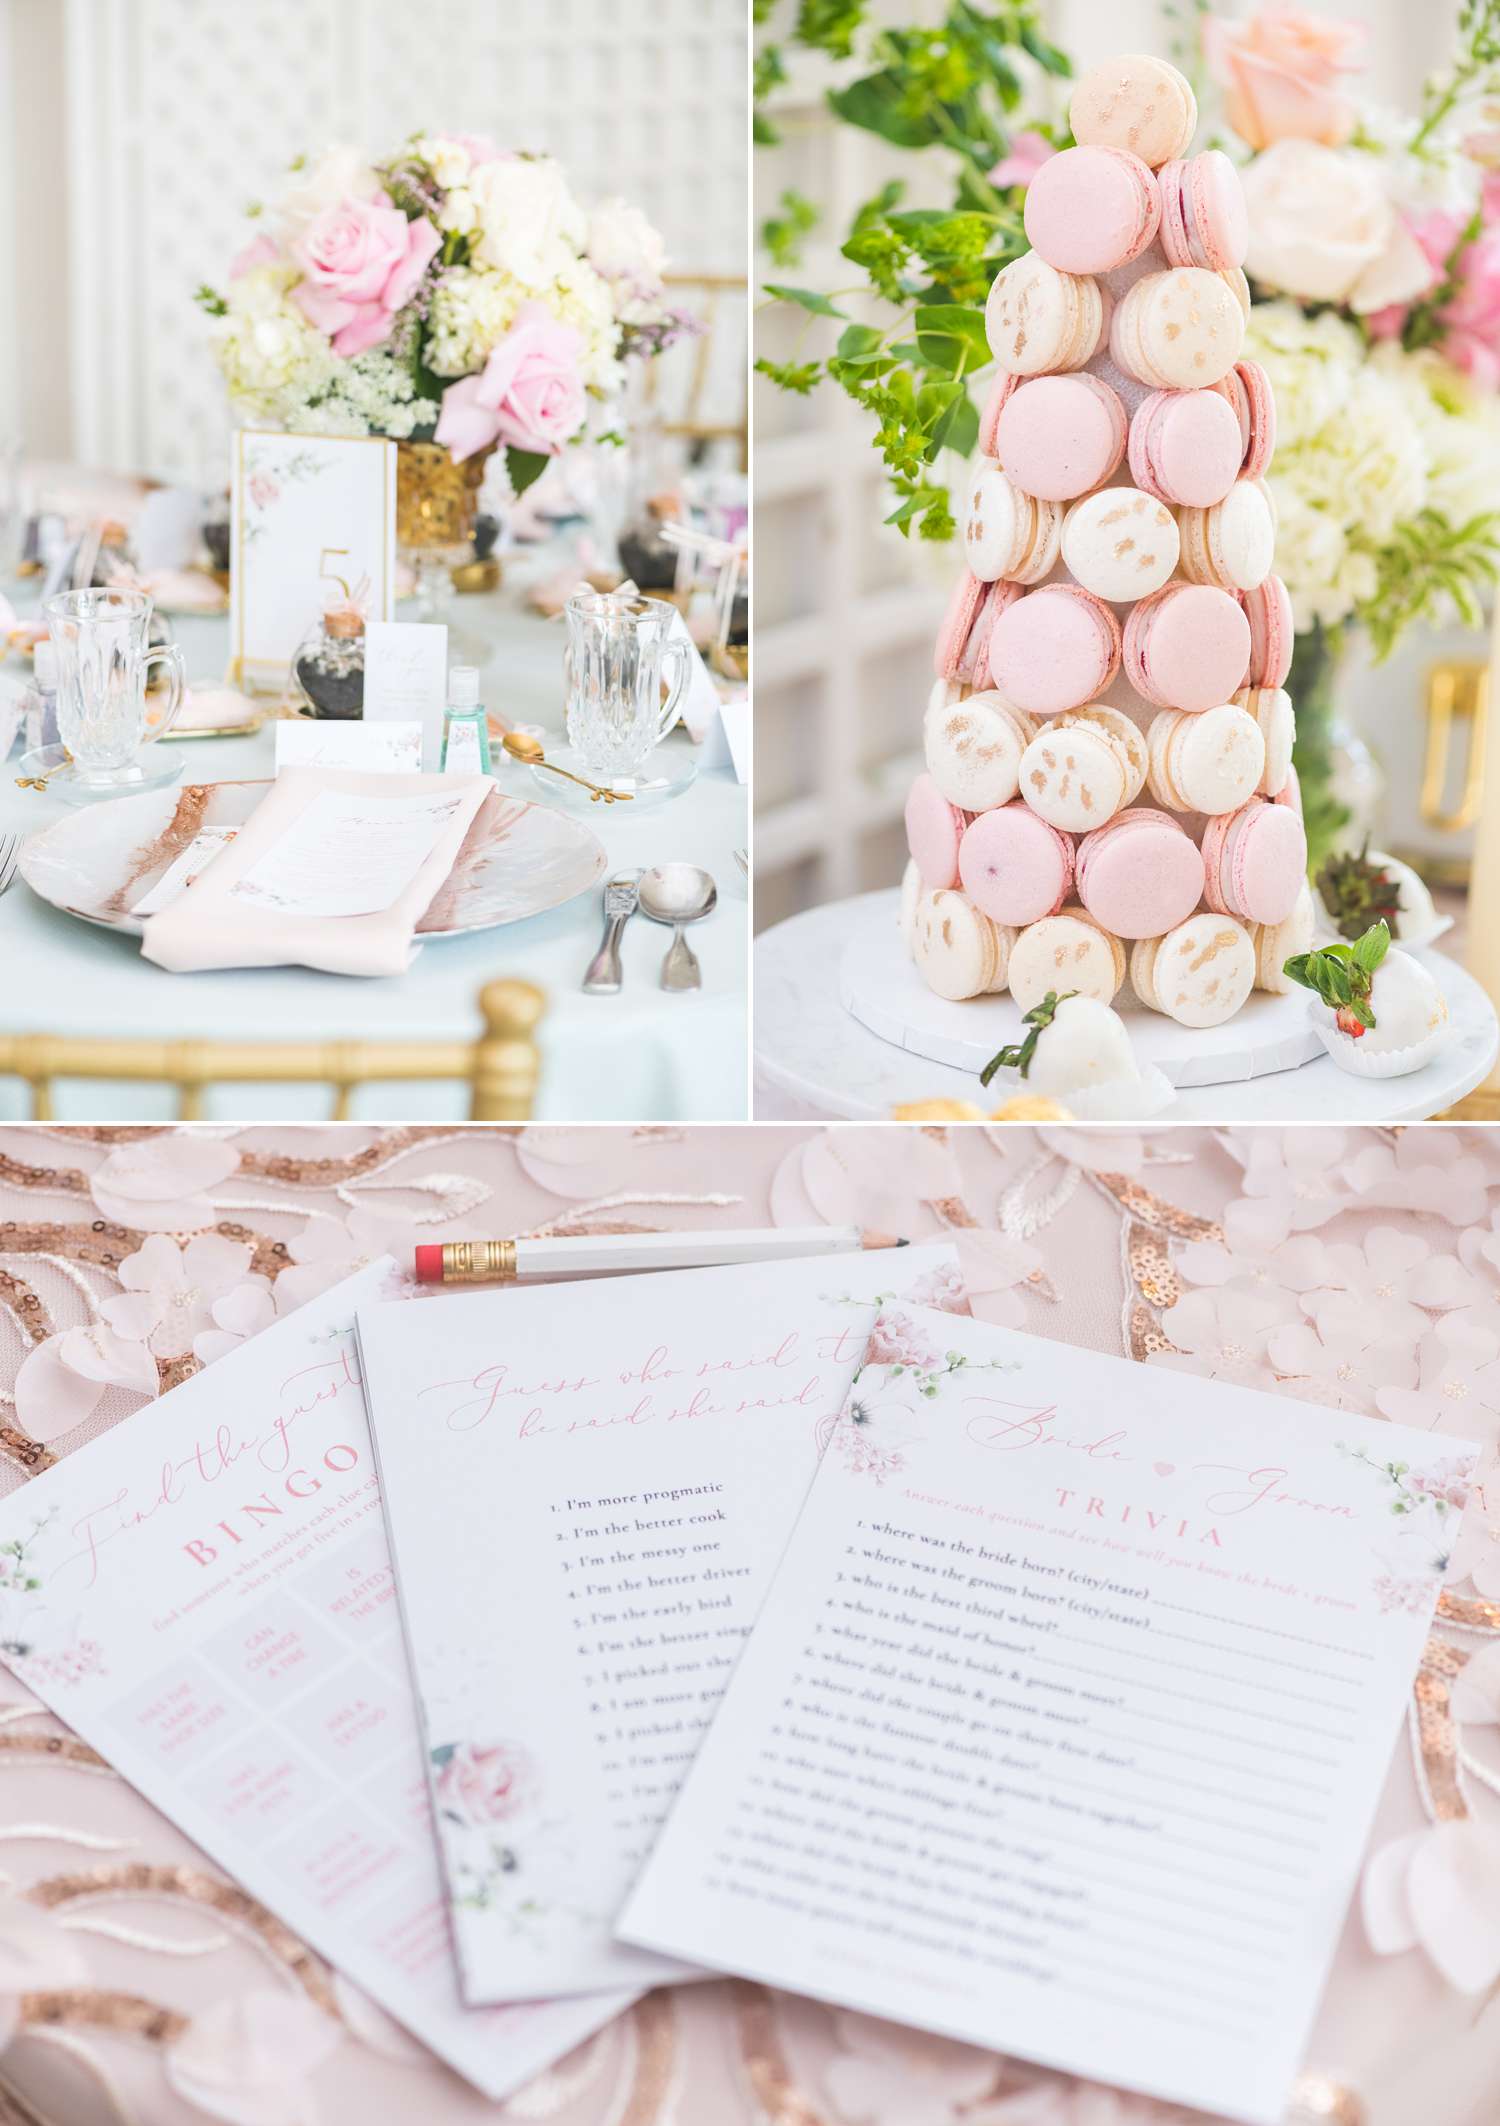 Bridgerton bridal shower party details, decor and macaron tower at Armour house in lake forest, Illinois